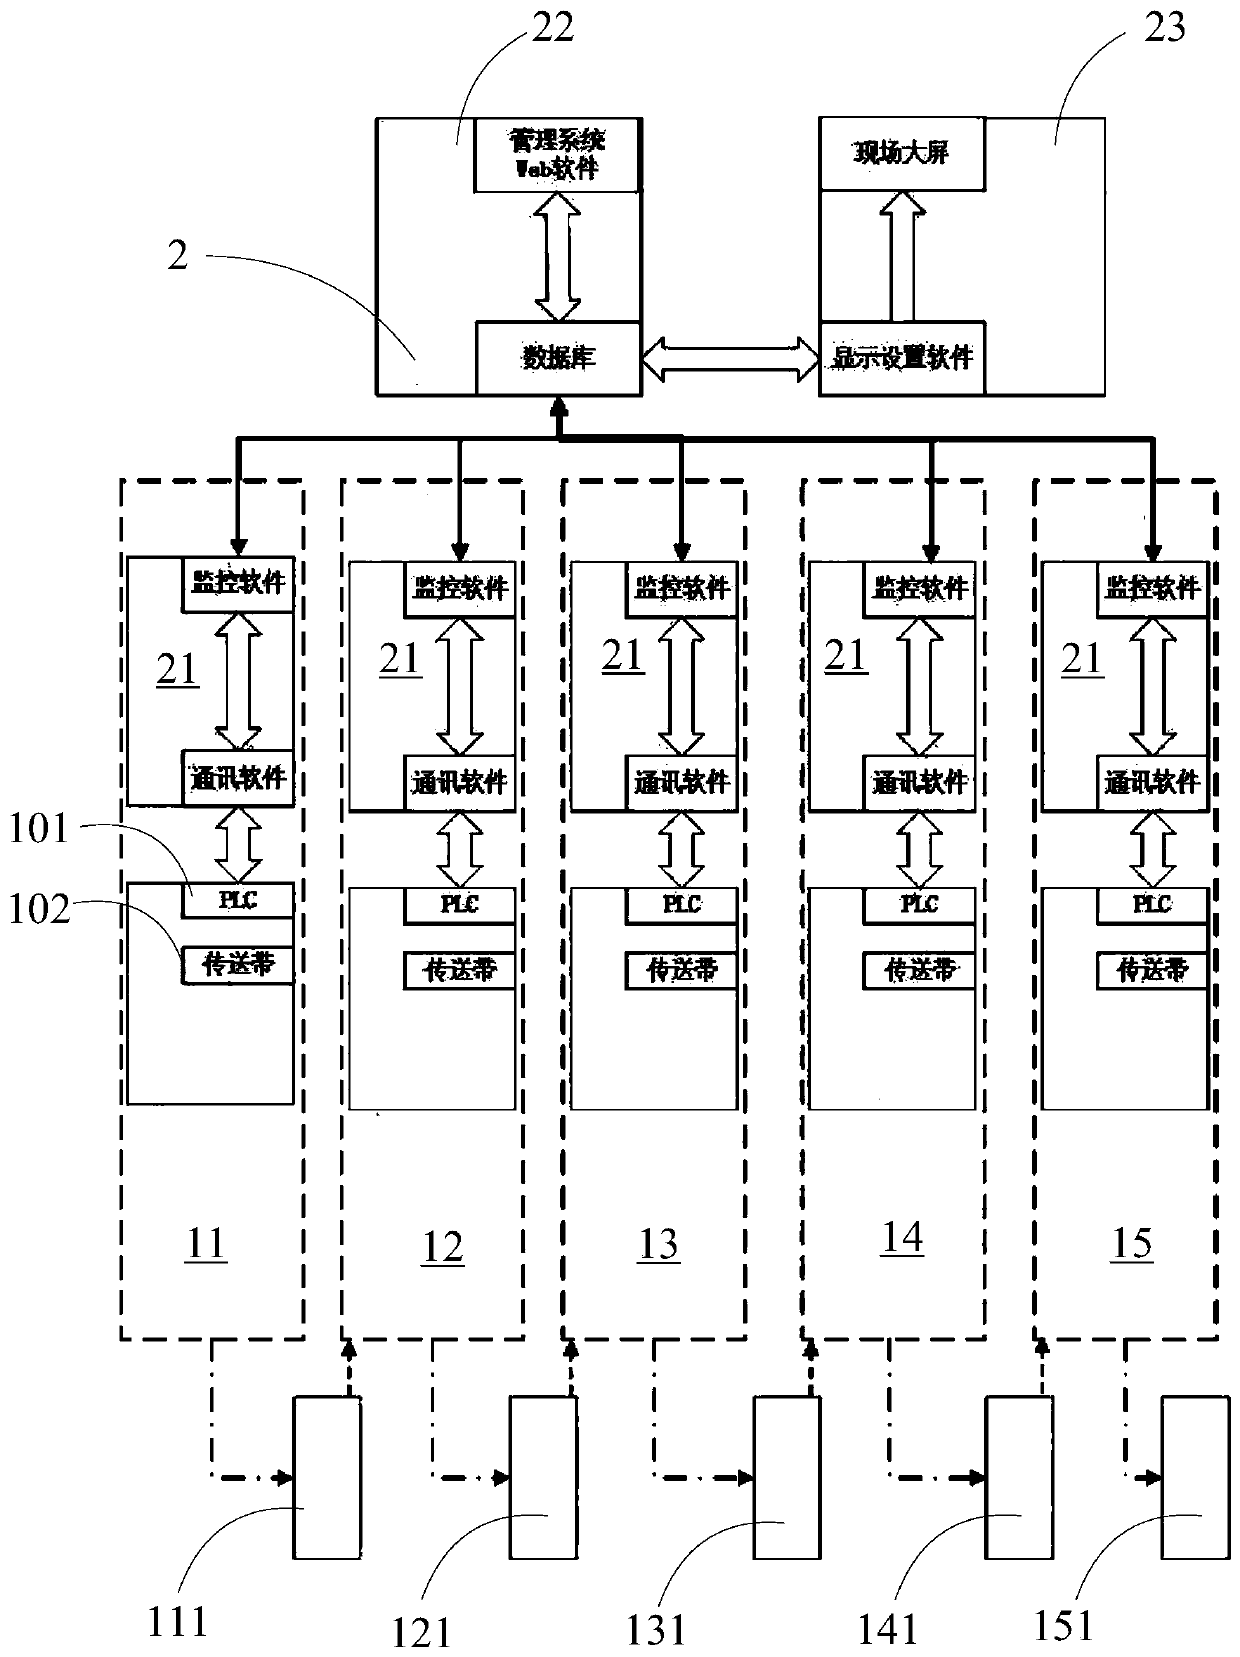 Synchronous beat system for container production factory and control method